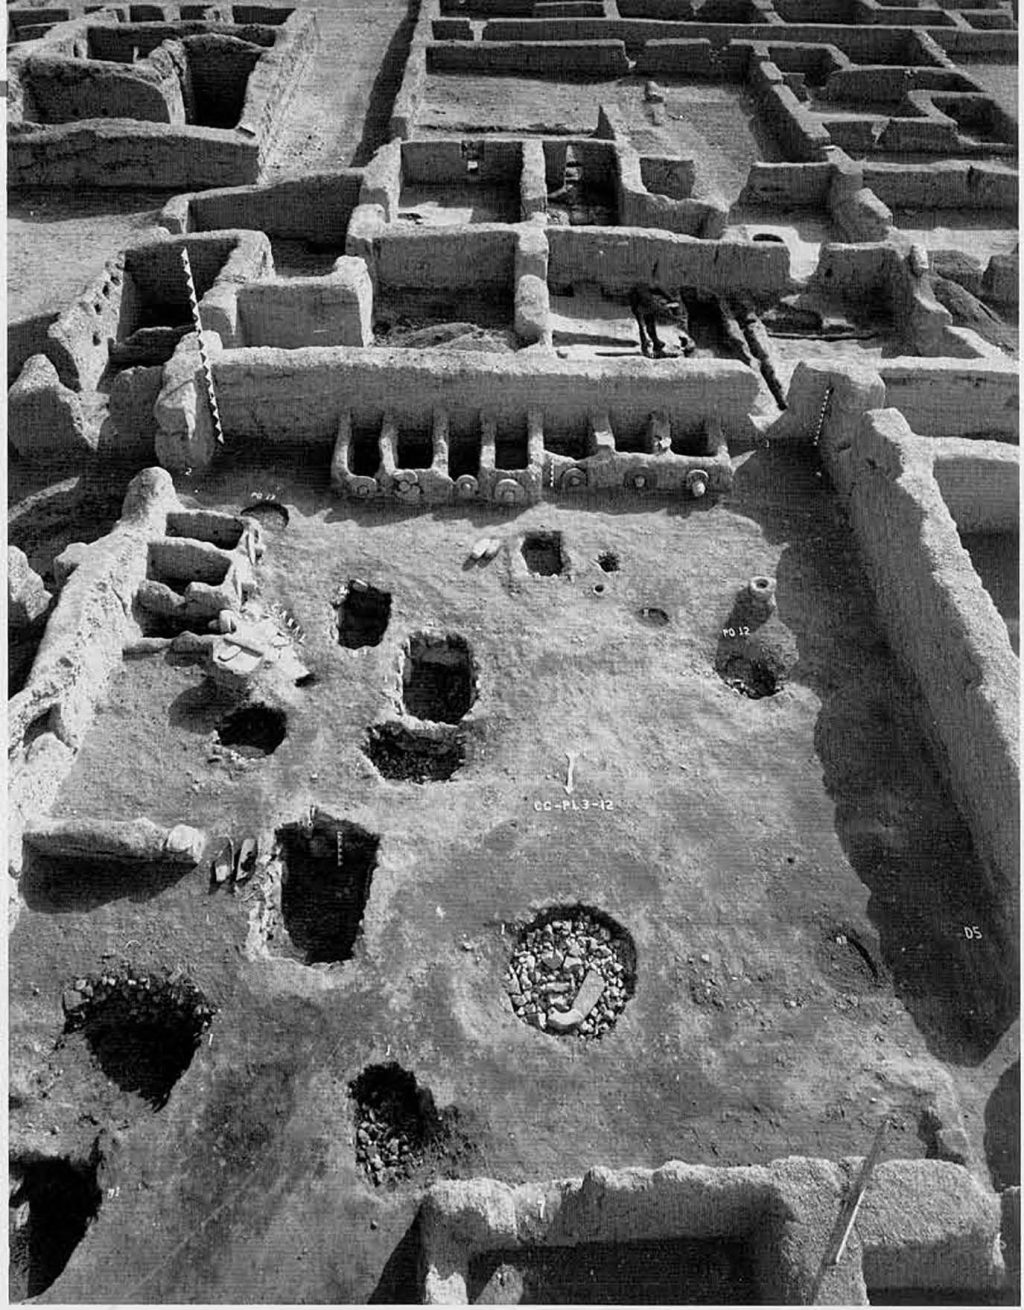 This plaza is the best preserved macaw breeding area at Paquimé. The square boxes were nesting pens and would have been covered with mats. The various pits may have been used to prepare the special food required by macaws. Note the doughnut-shaped stones (with plugs) that were used as entrances to the cages. These have been found at a few other sites in the surrounding area and clearly indicate that macaws were raised at nearby communities. 